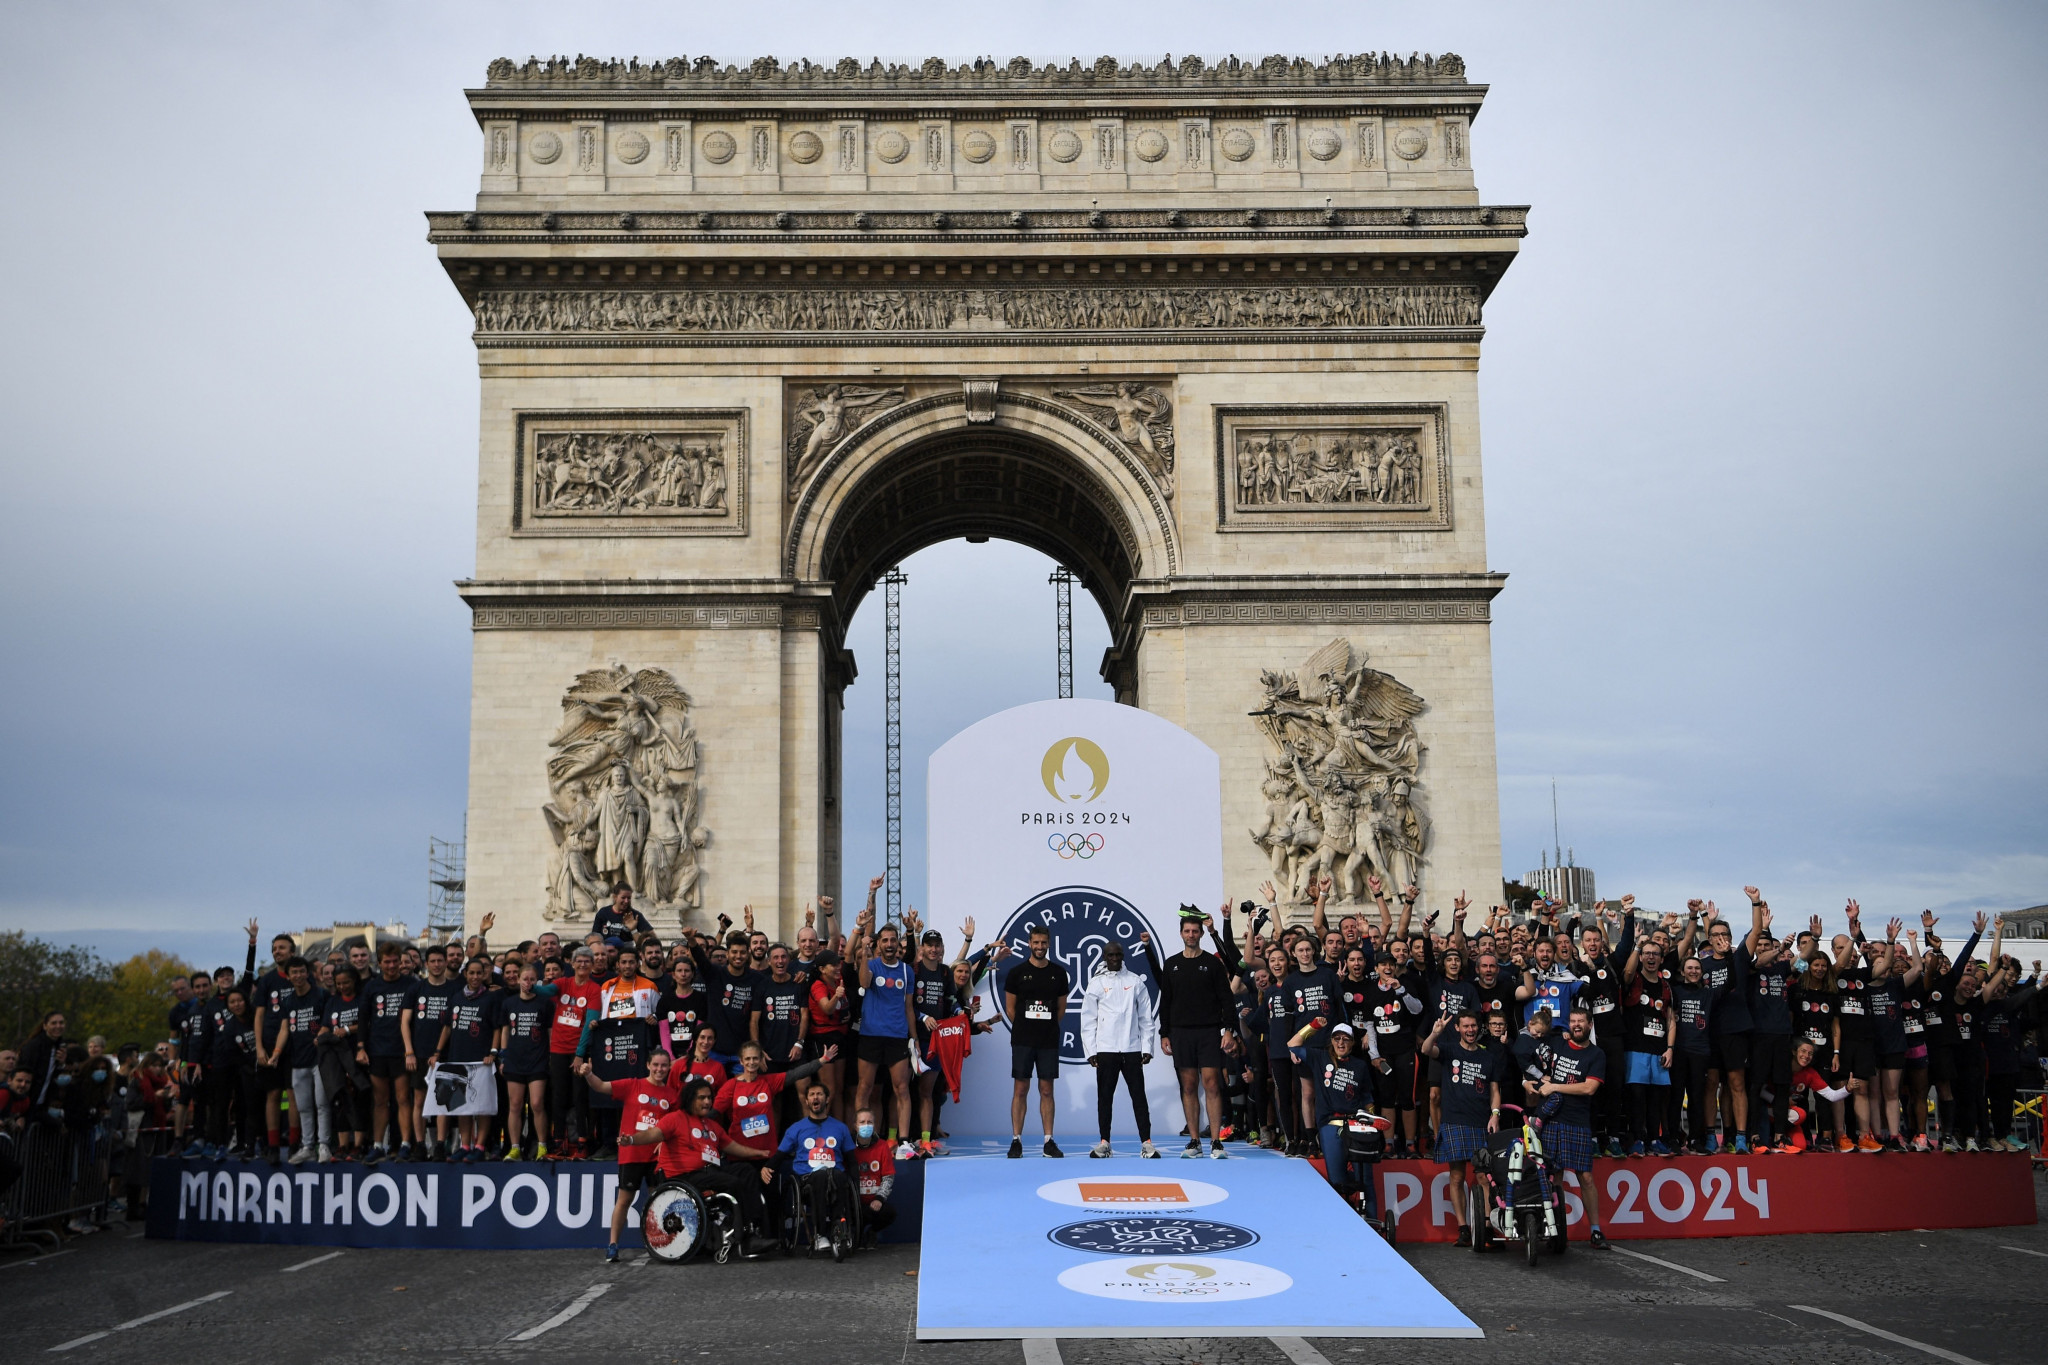 Runners win places in Paris 2024 mass-participation marathon after racing Kipchoge